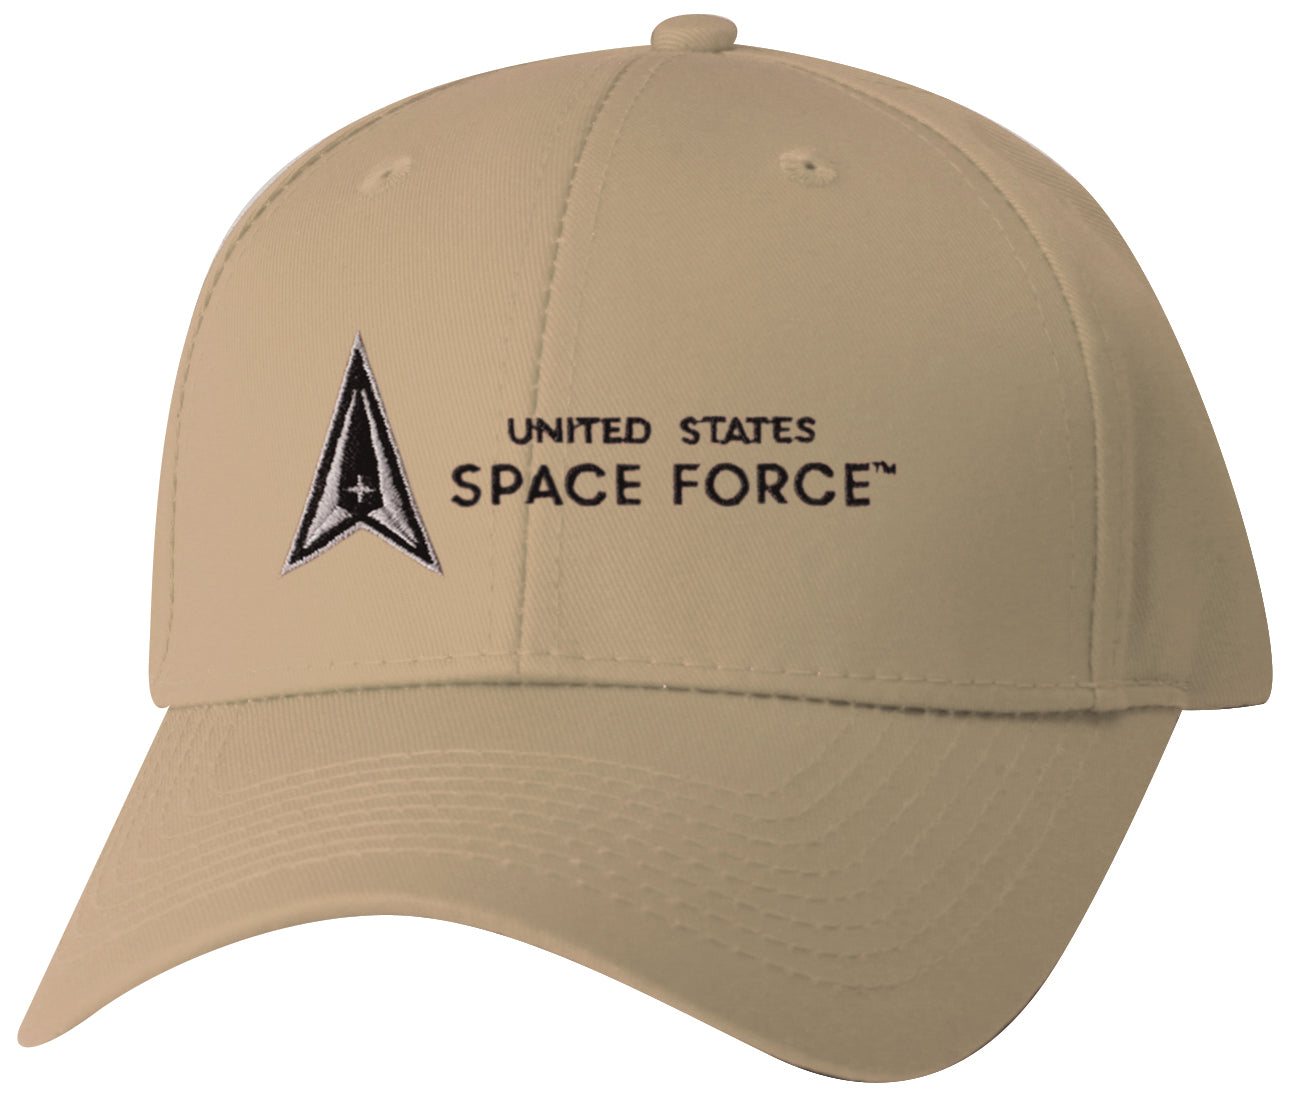 United States Space Force Logo Embroidered on a KHAKI Structured Ball Cap